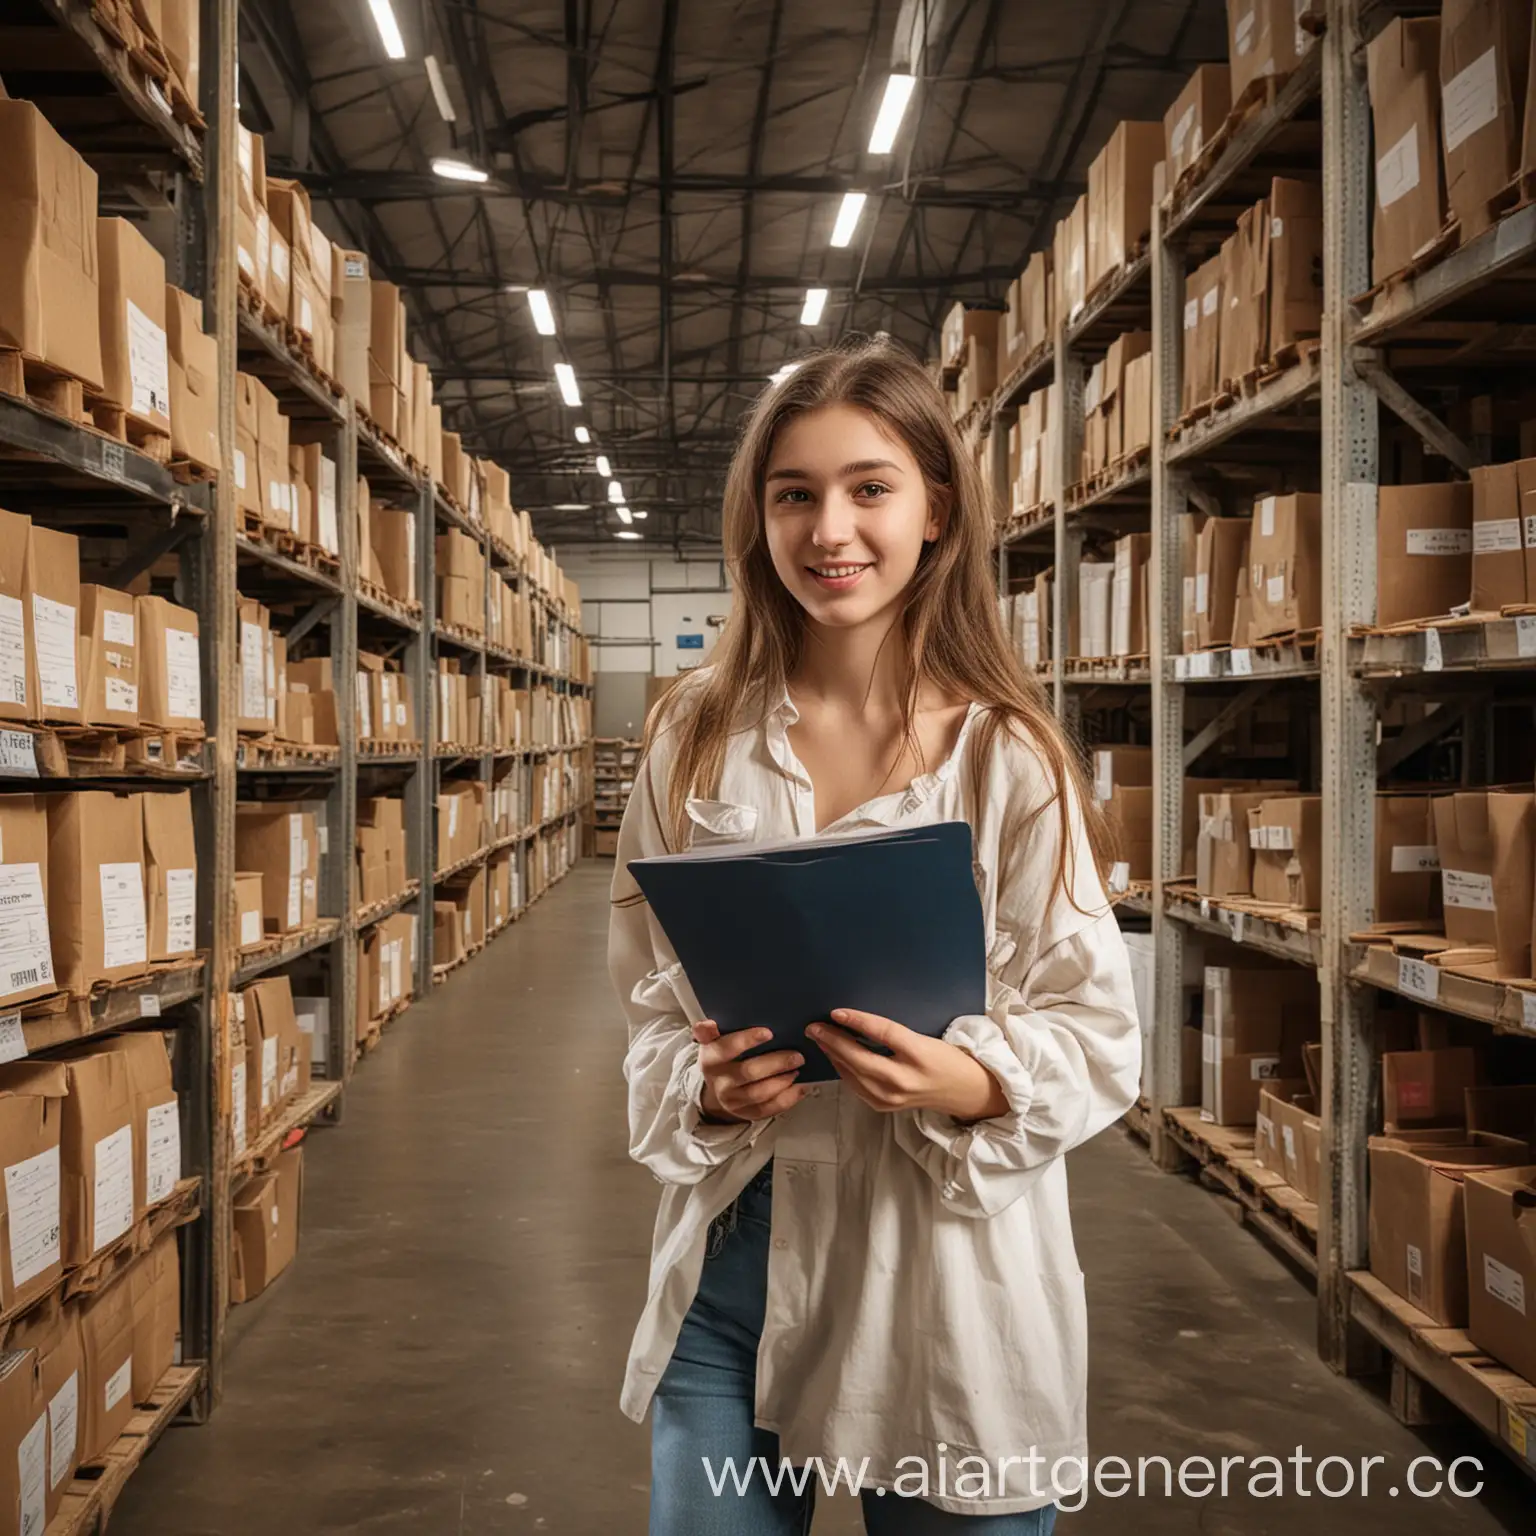 Girl-with-Documents-in-Wildberries-Marketplace-Warehouse